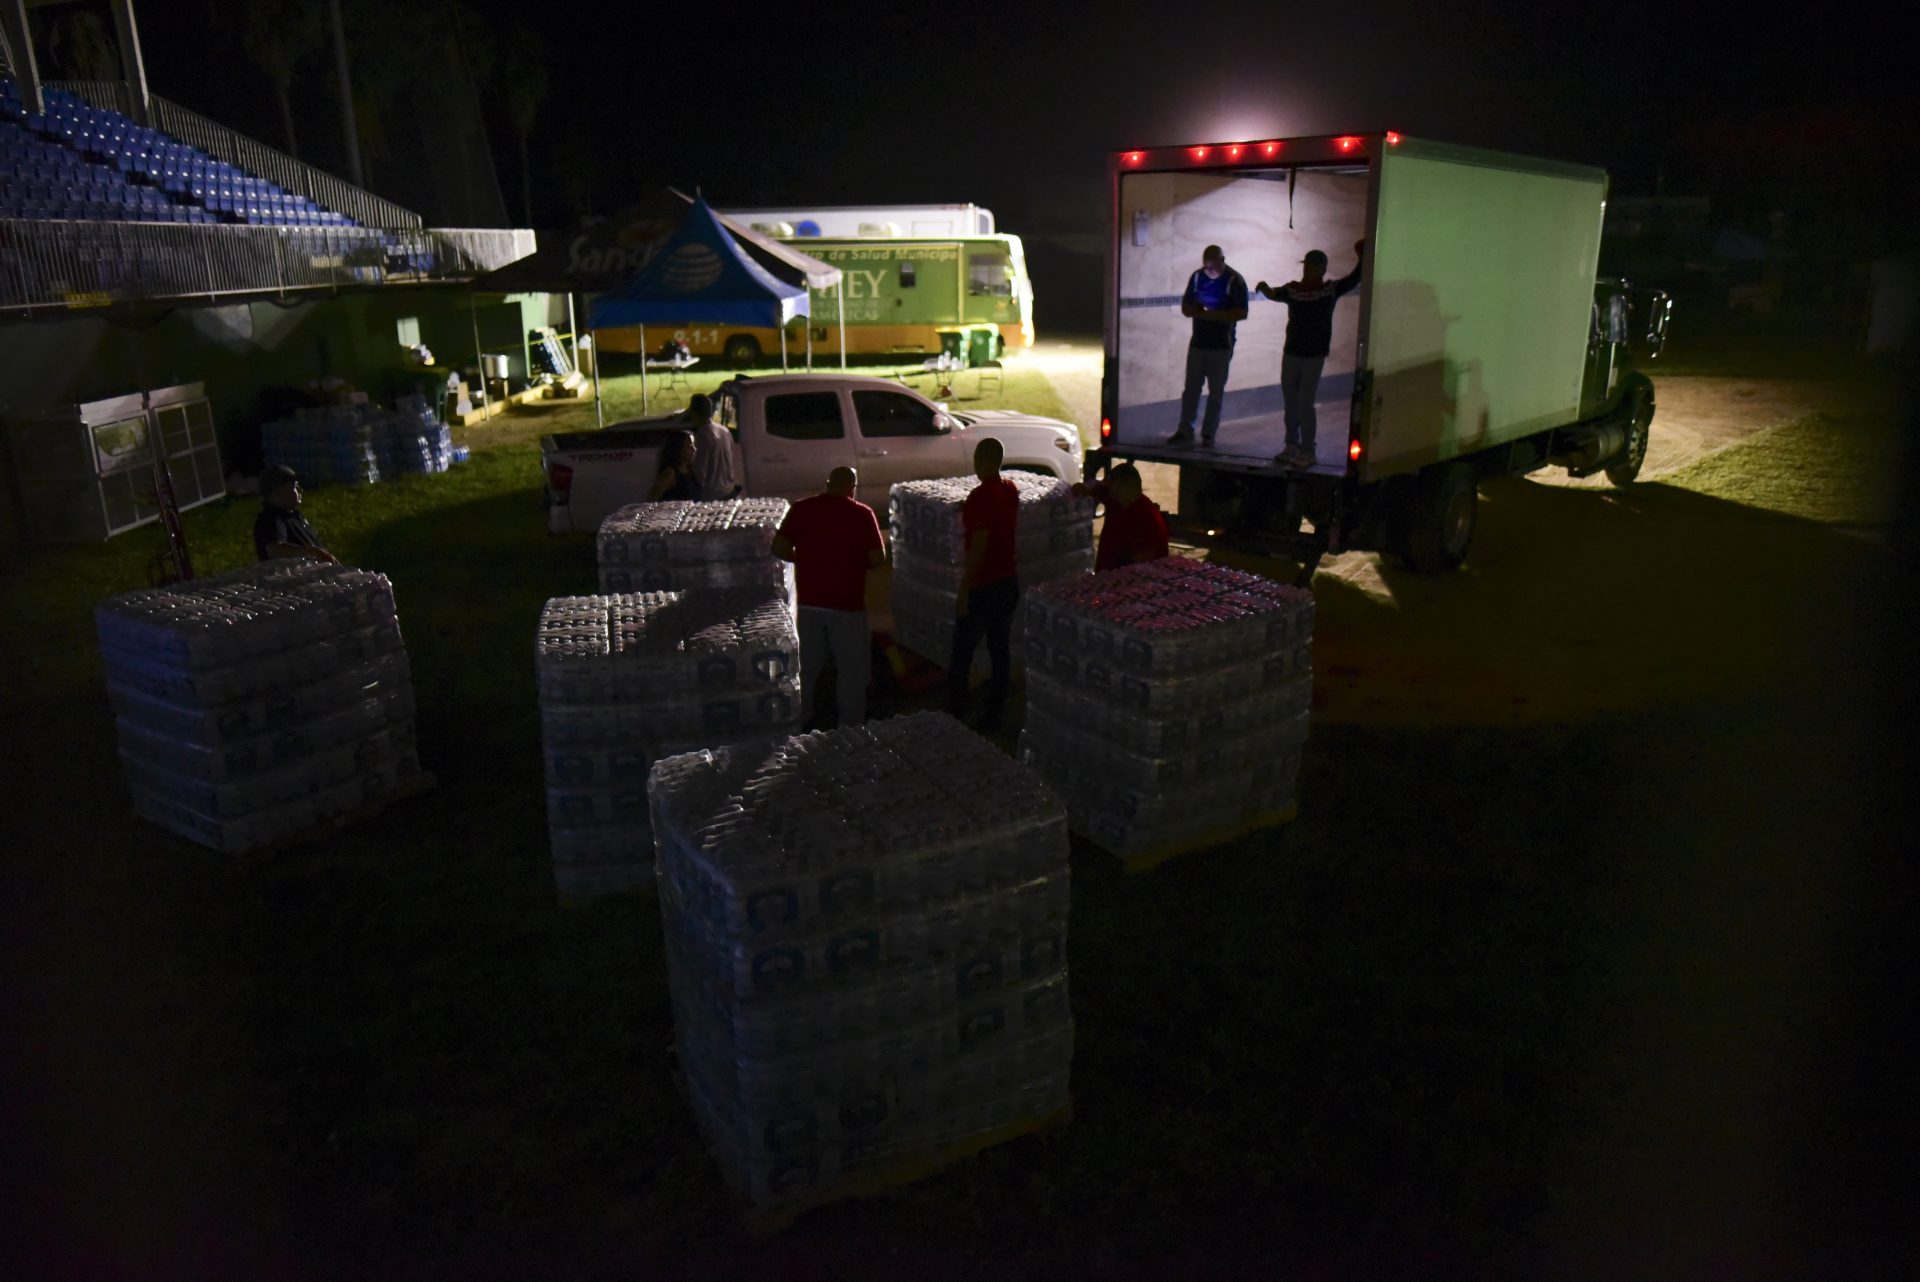 Volunteers deliver boxes of water to a baseball stadium that has been opened as a shelter to residents who lost their homes in a 6.4 magnitude earthquake, in Guayanilla, Puerto Rico, late Thursday, Jan. 9, 2020. Hundreds of thousands of Puerto Ricans are still without power and water, and thousands are staying in shelters and sleeping on sidewalks since Tuesday's earthquake.